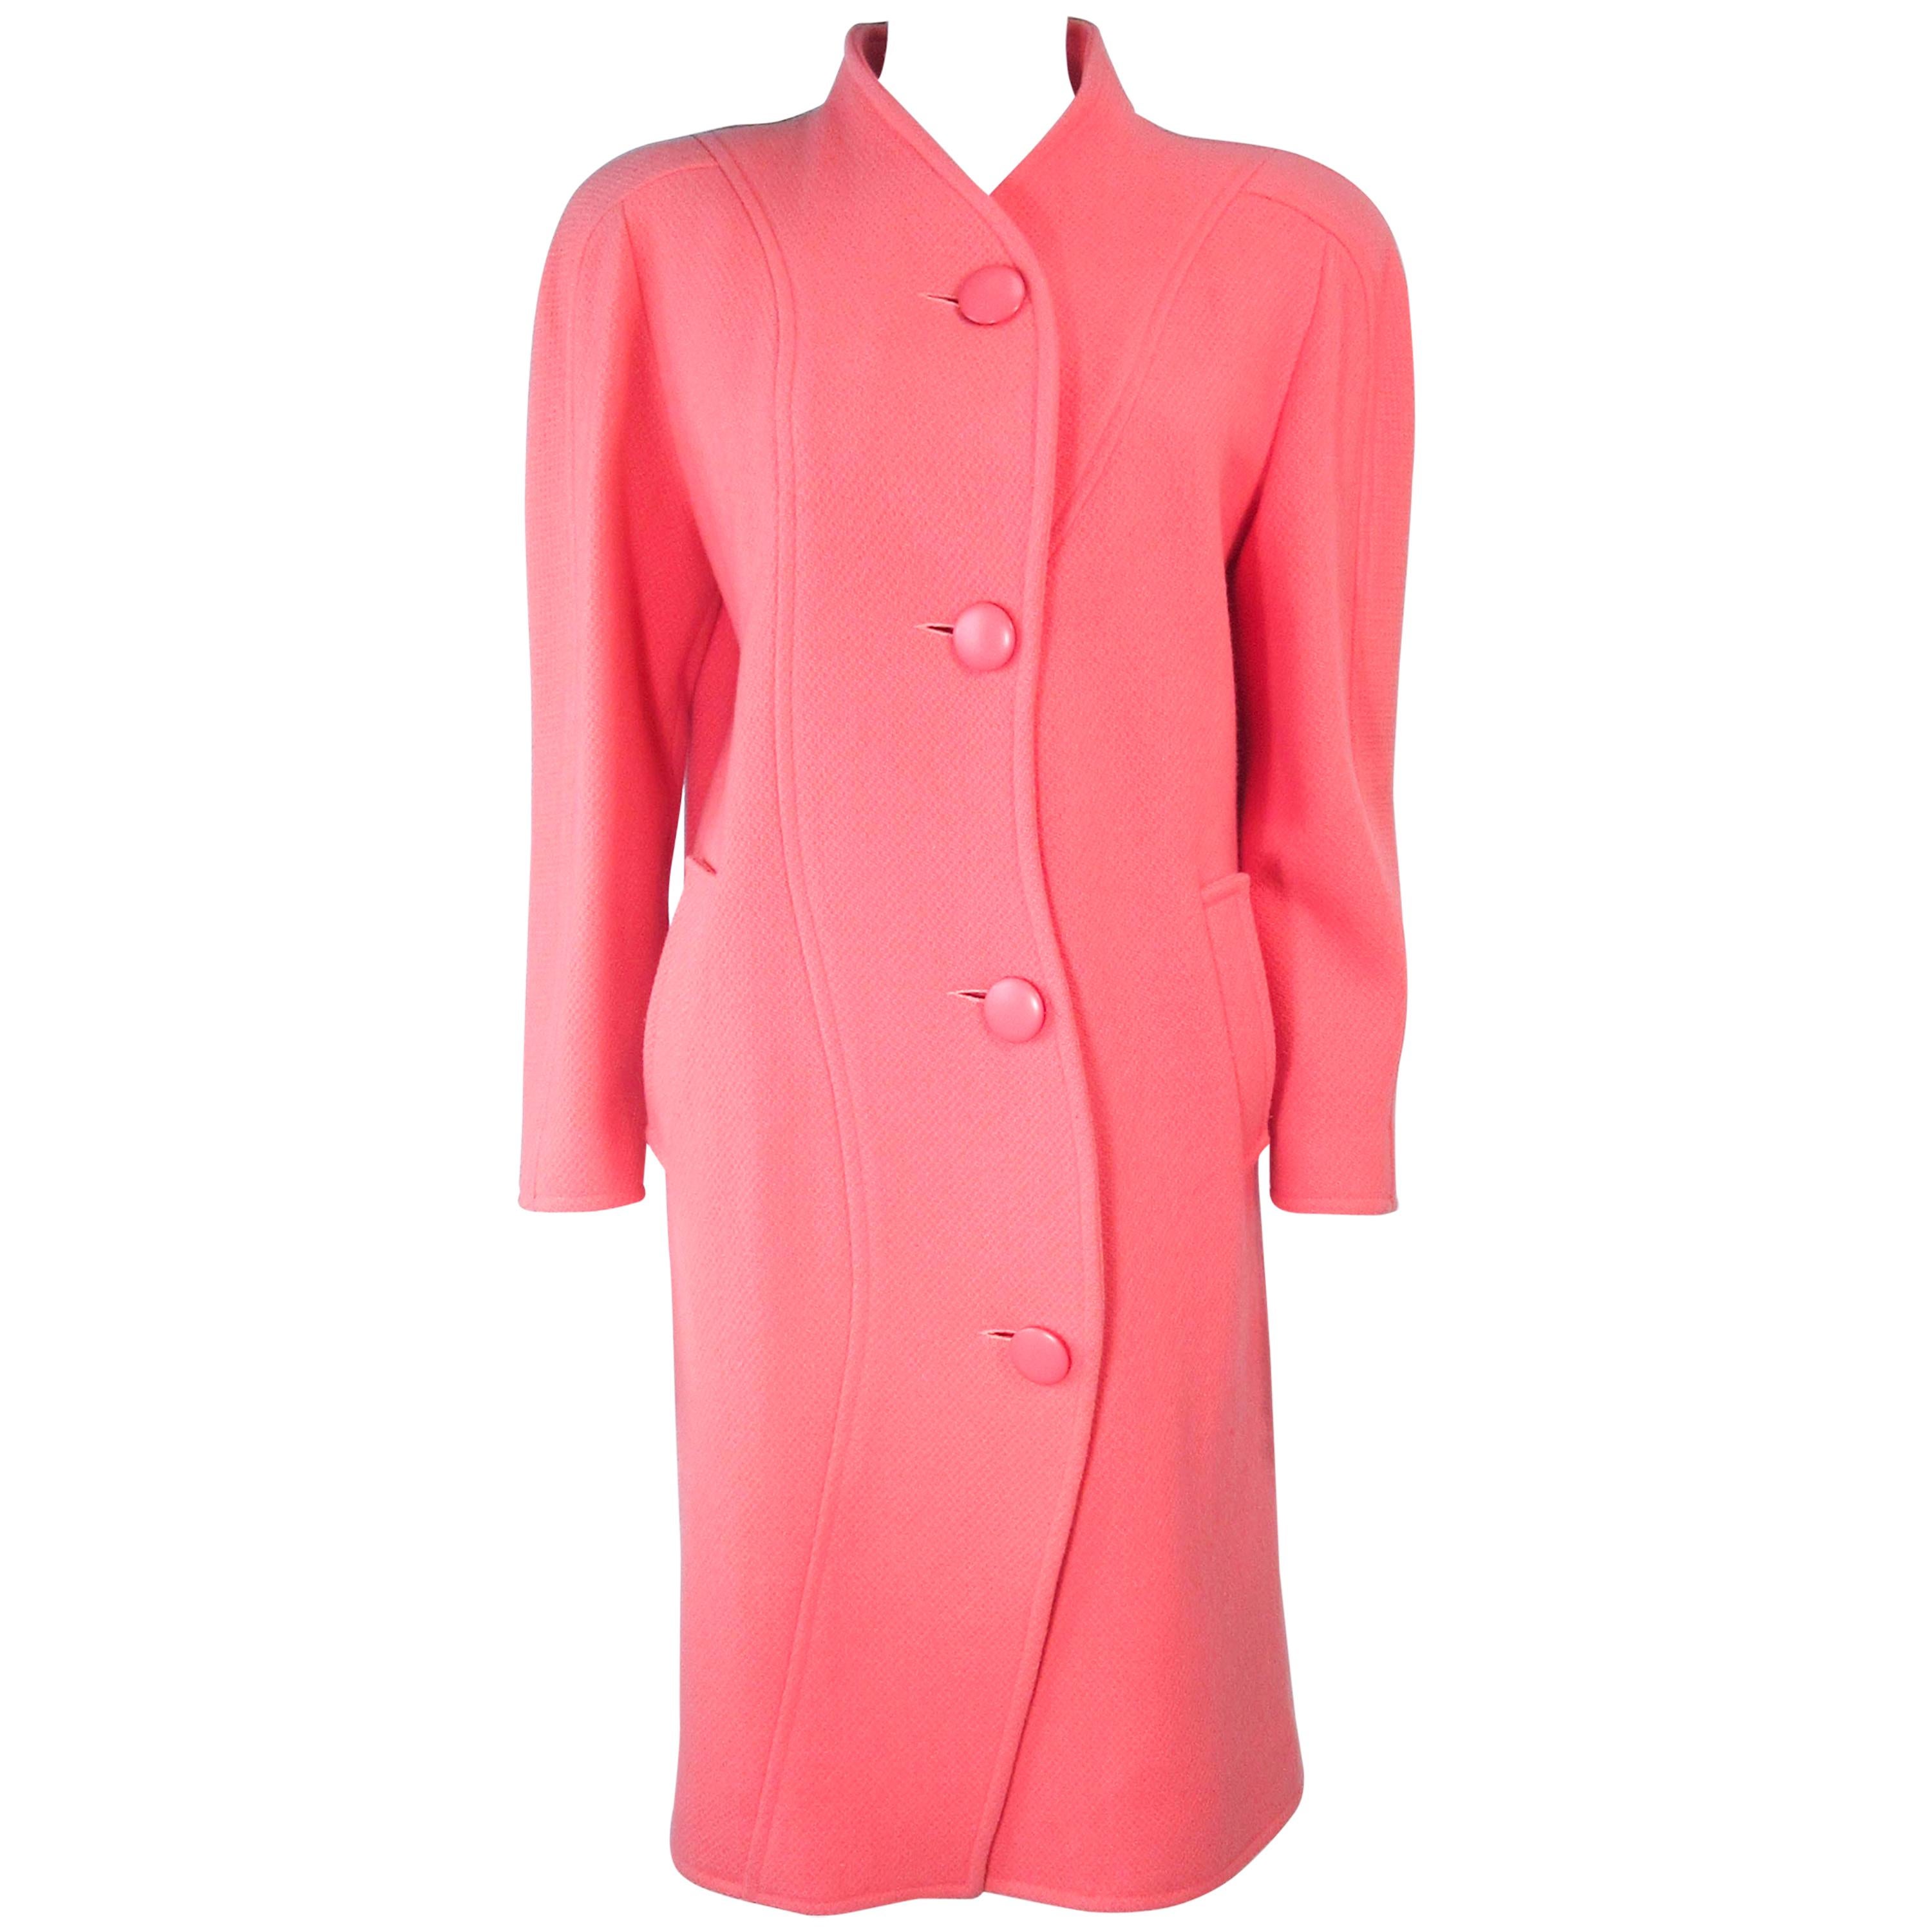 COURREGES Peach Coral Wool Coat Size 00